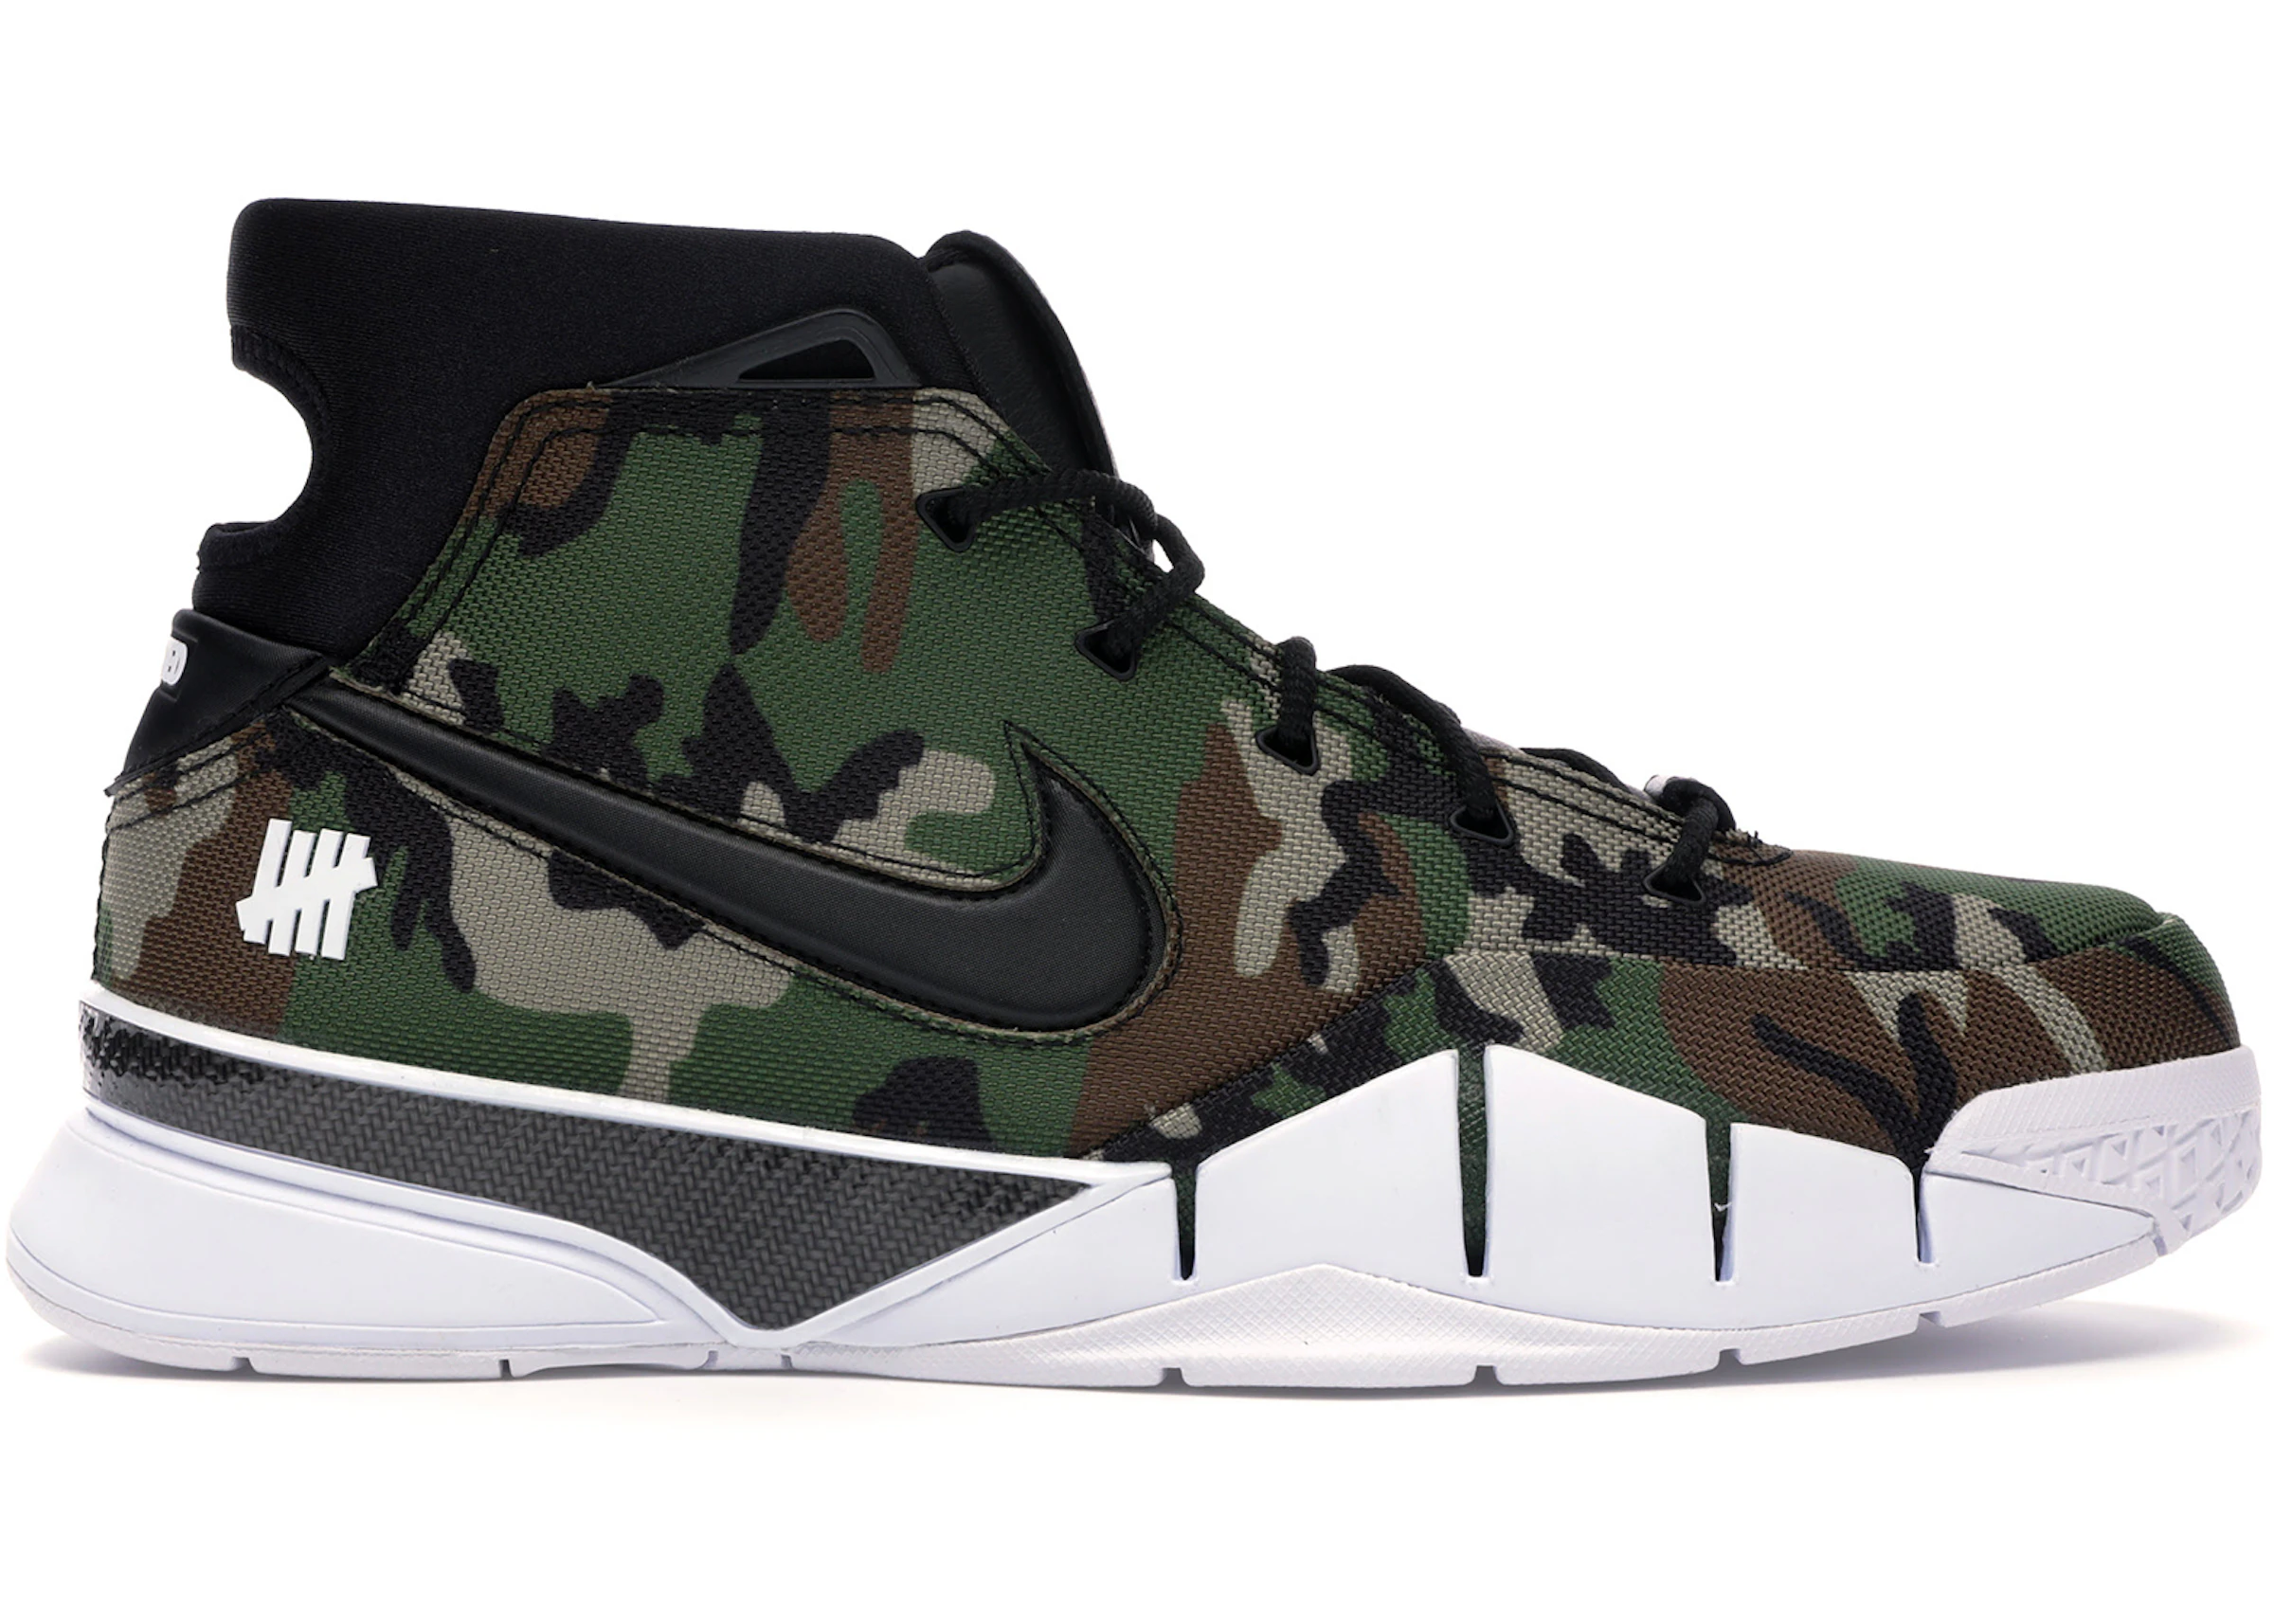 Andes physically pray Buy Nike Kobe 1 Shoes & New Sneakers - StockX